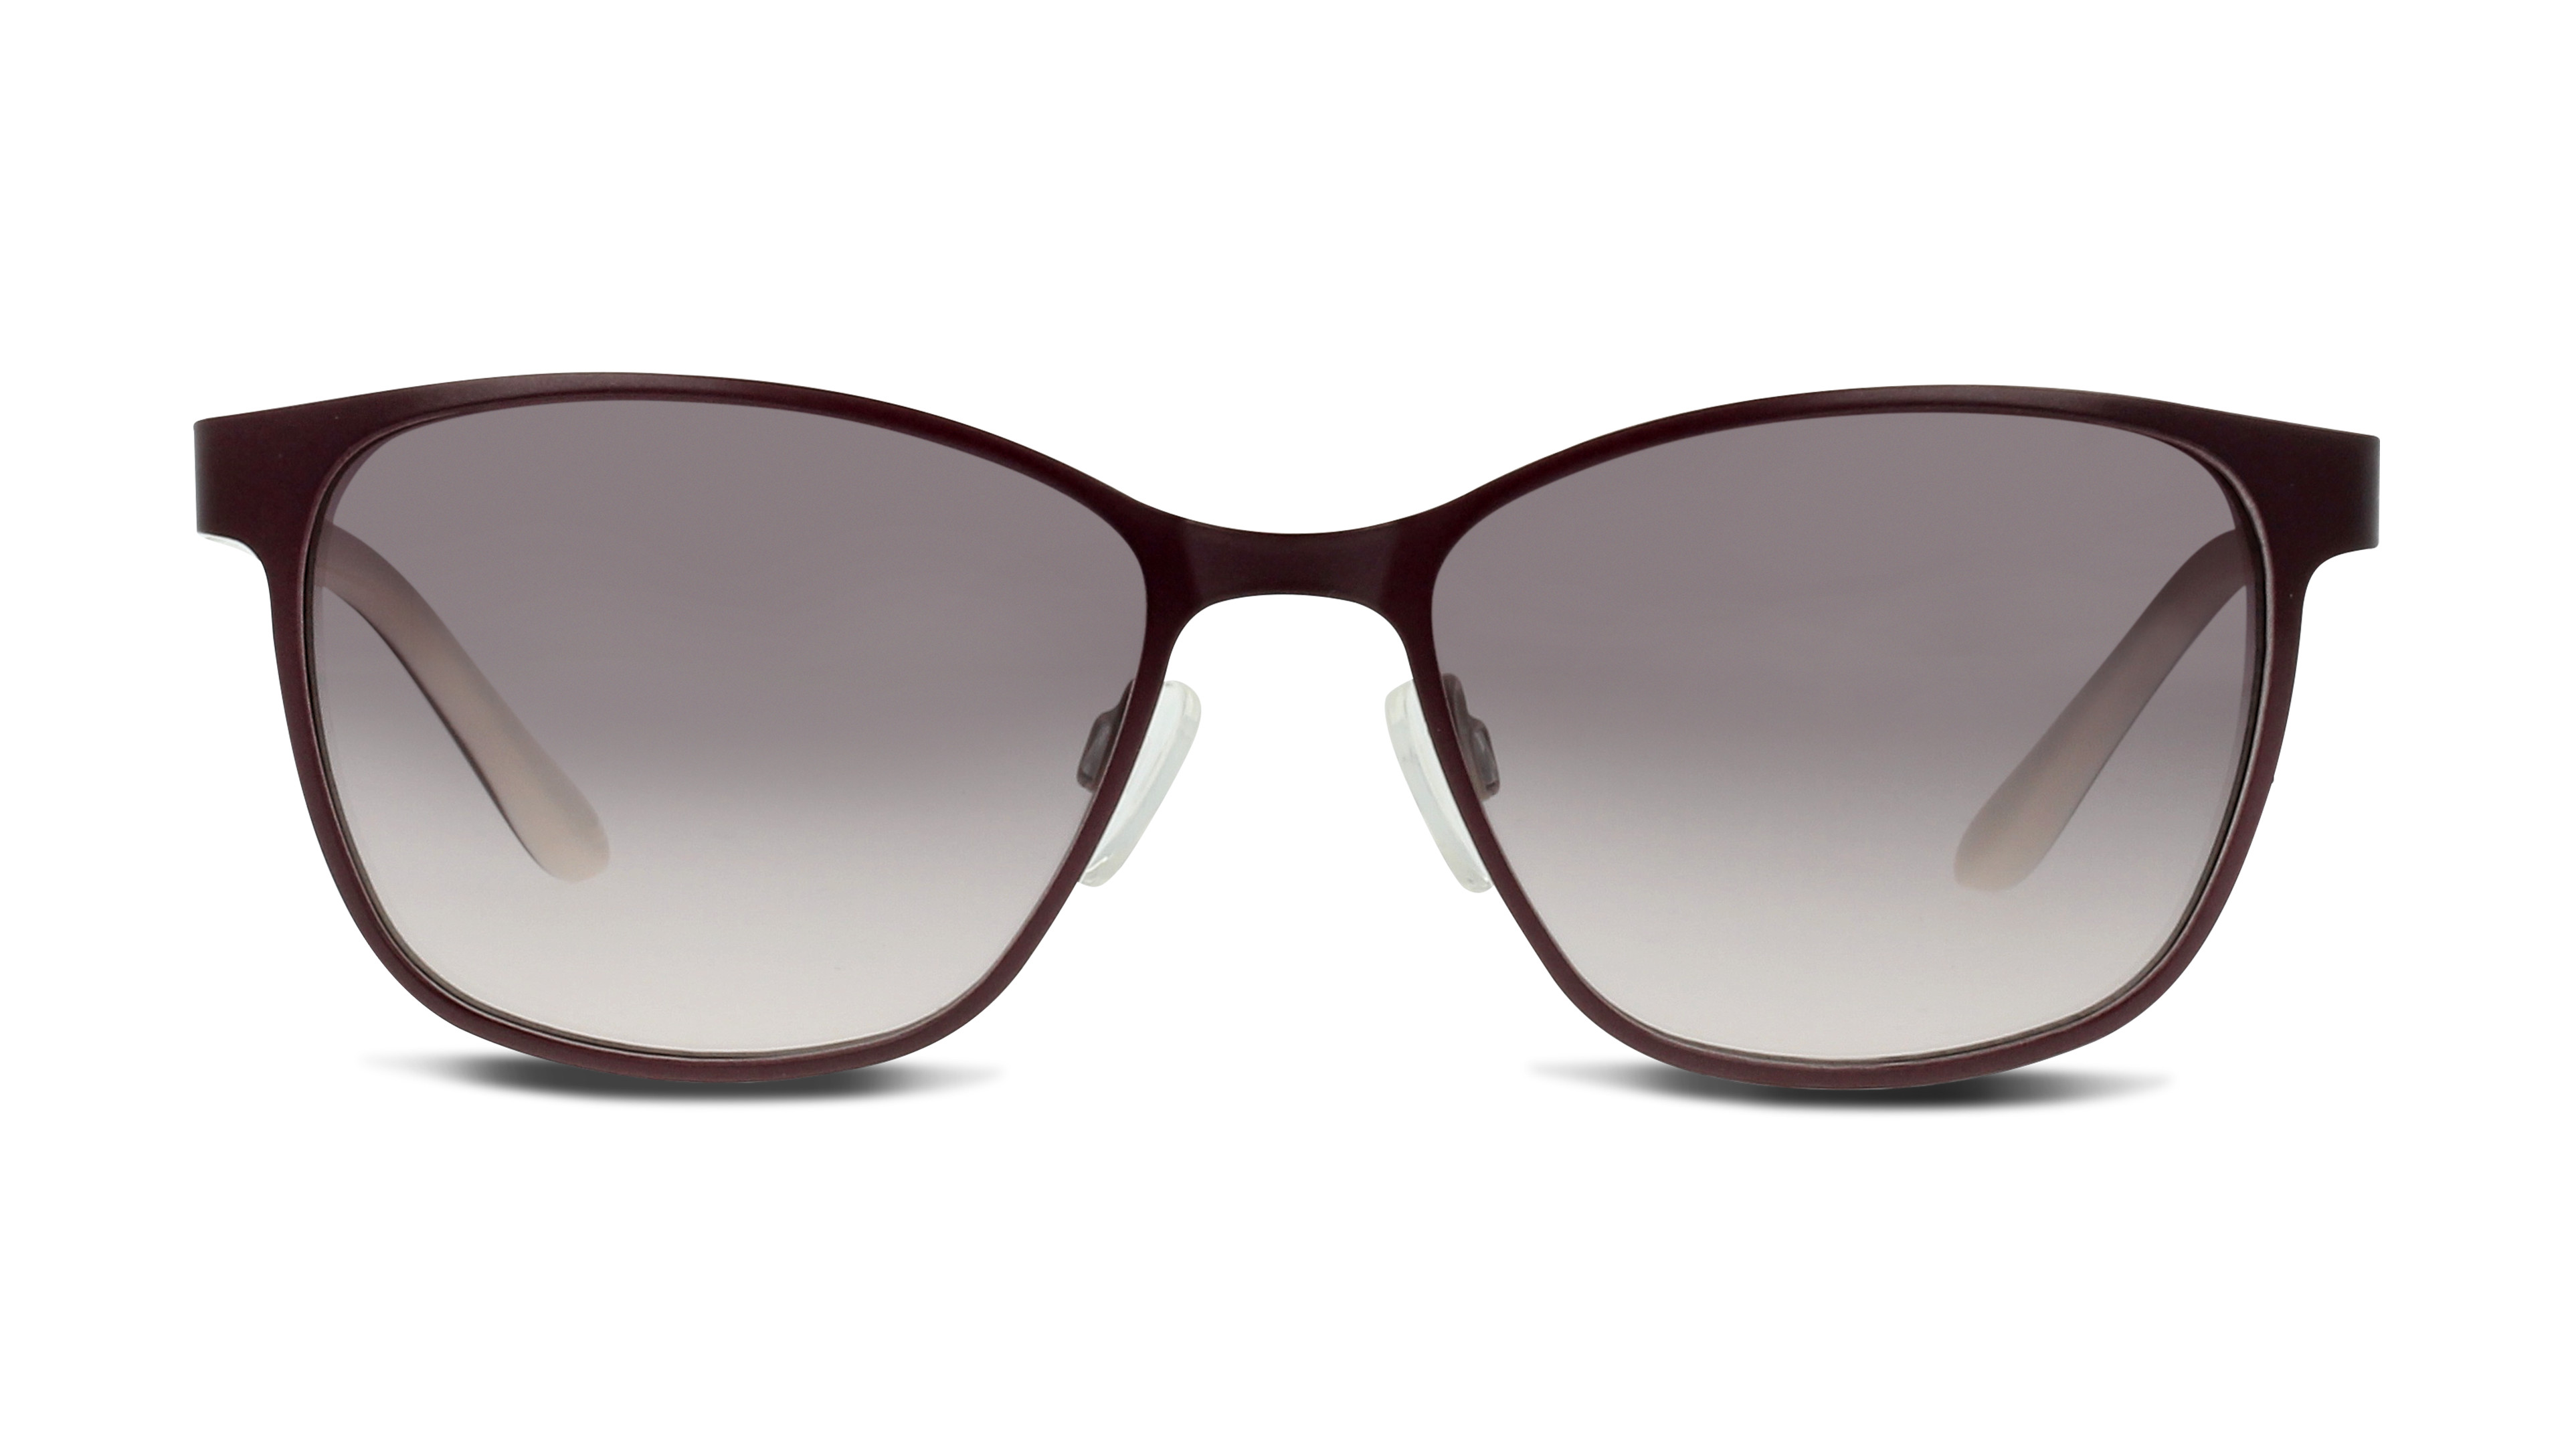 [products.image.front] HUMPHREY´S eyewear 585224 501055 Sonnenbrille